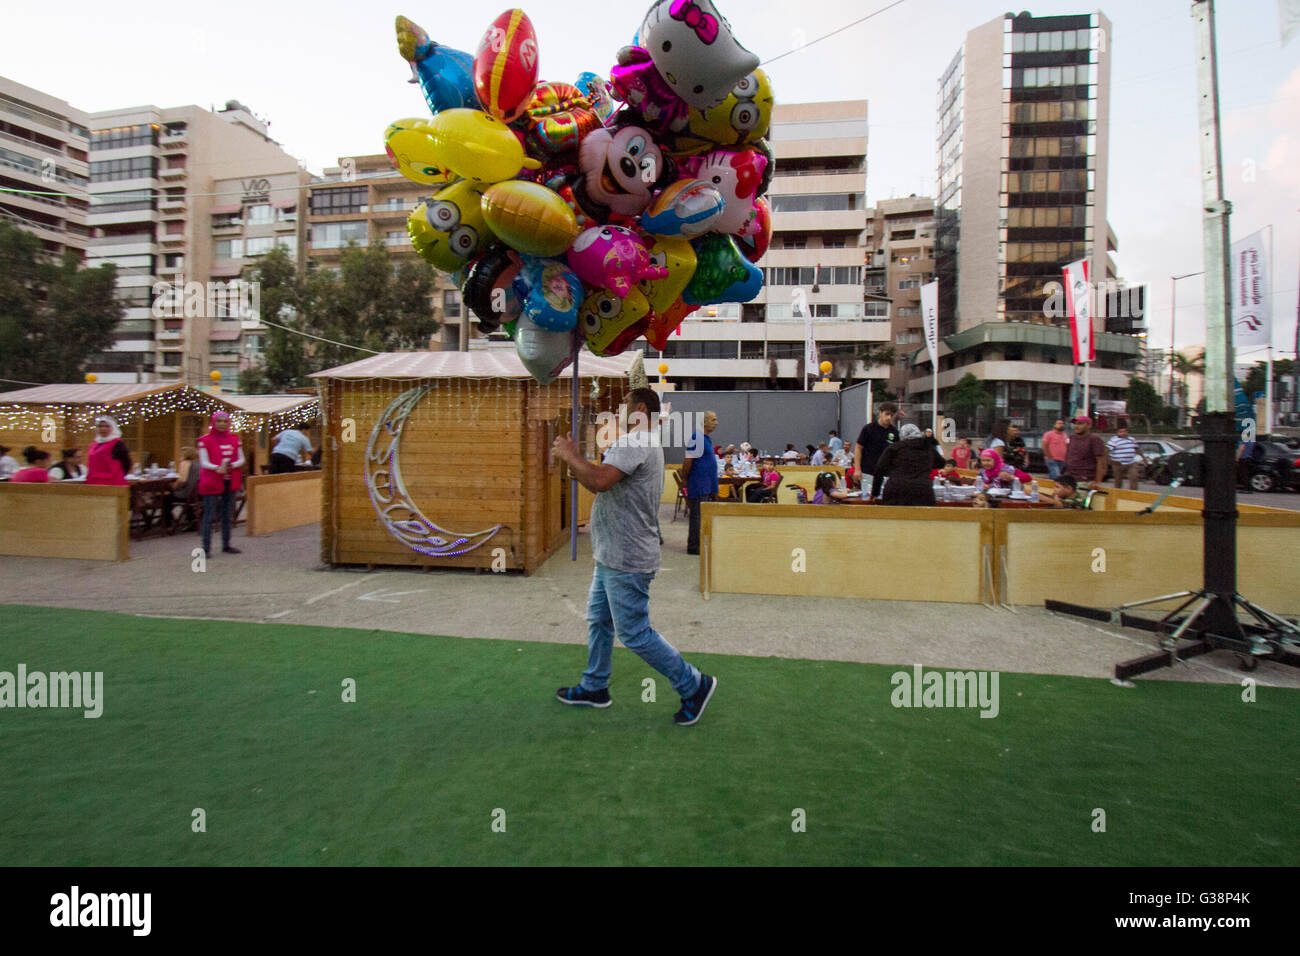 Beirut, Lebanon. 9th June, 2016. A man carries balloons as  Devout Muslim families prepare to end their daily Ramadan fast at sunset for the evening meal known as 'Iftar'  at the purposely built Ramadan Village in Beirut Credit:  amer ghazzal/Alamy Live News Stock Photo